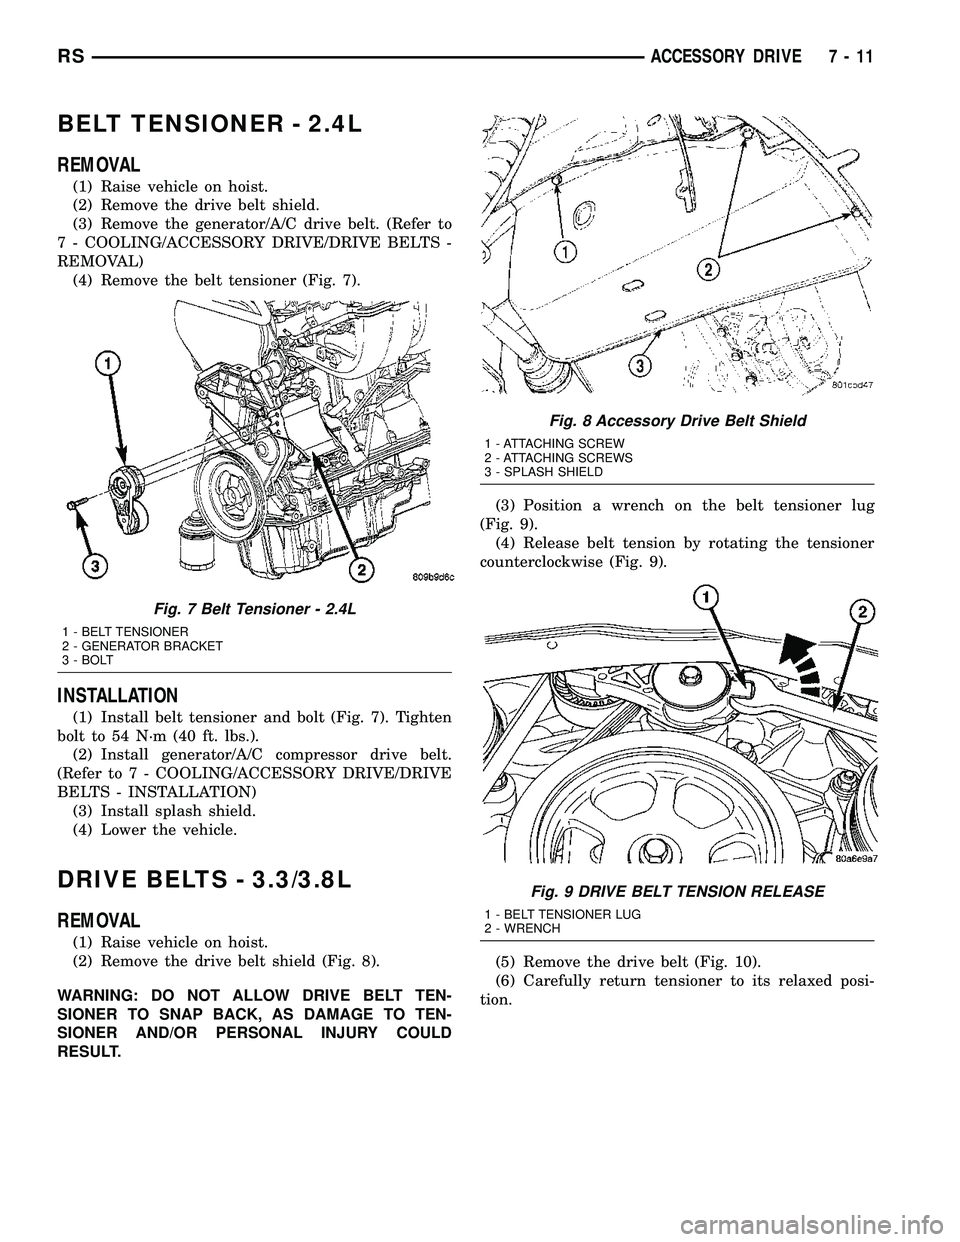 CHRYSLER VOYAGER 2005  Service Manual BELT TENSIONER - 2.4L
REMOVAL
(1) Raise vehicle on hoist.
(2) Remove the drive belt shield.
(3) Remove the generator/A/C drive belt. (Refer to
7 - COOLING/ACCESSORY DRIVE/DRIVE BELTS -
REMOVAL)
(4) Re